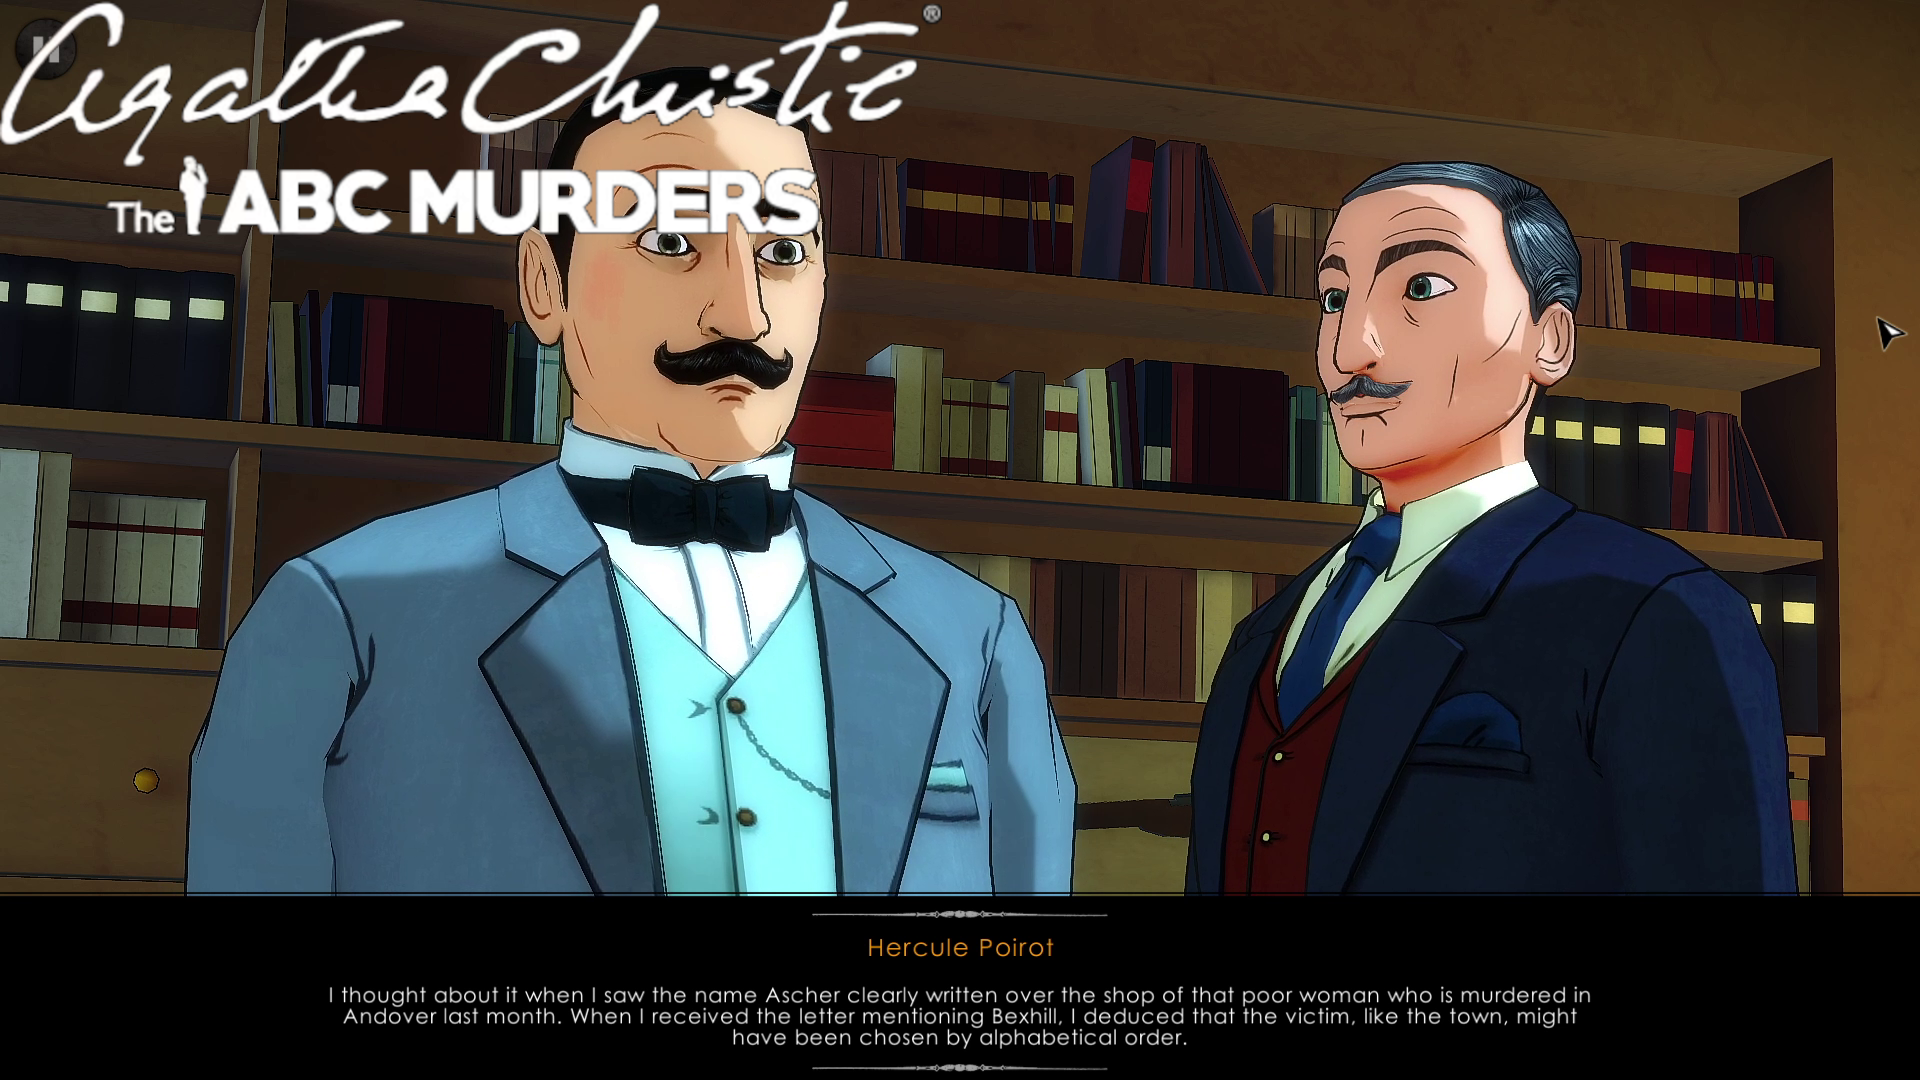 But is the Corpse Hot Though? – Let’s Play Agatha Christie the ABC Murders Part 3